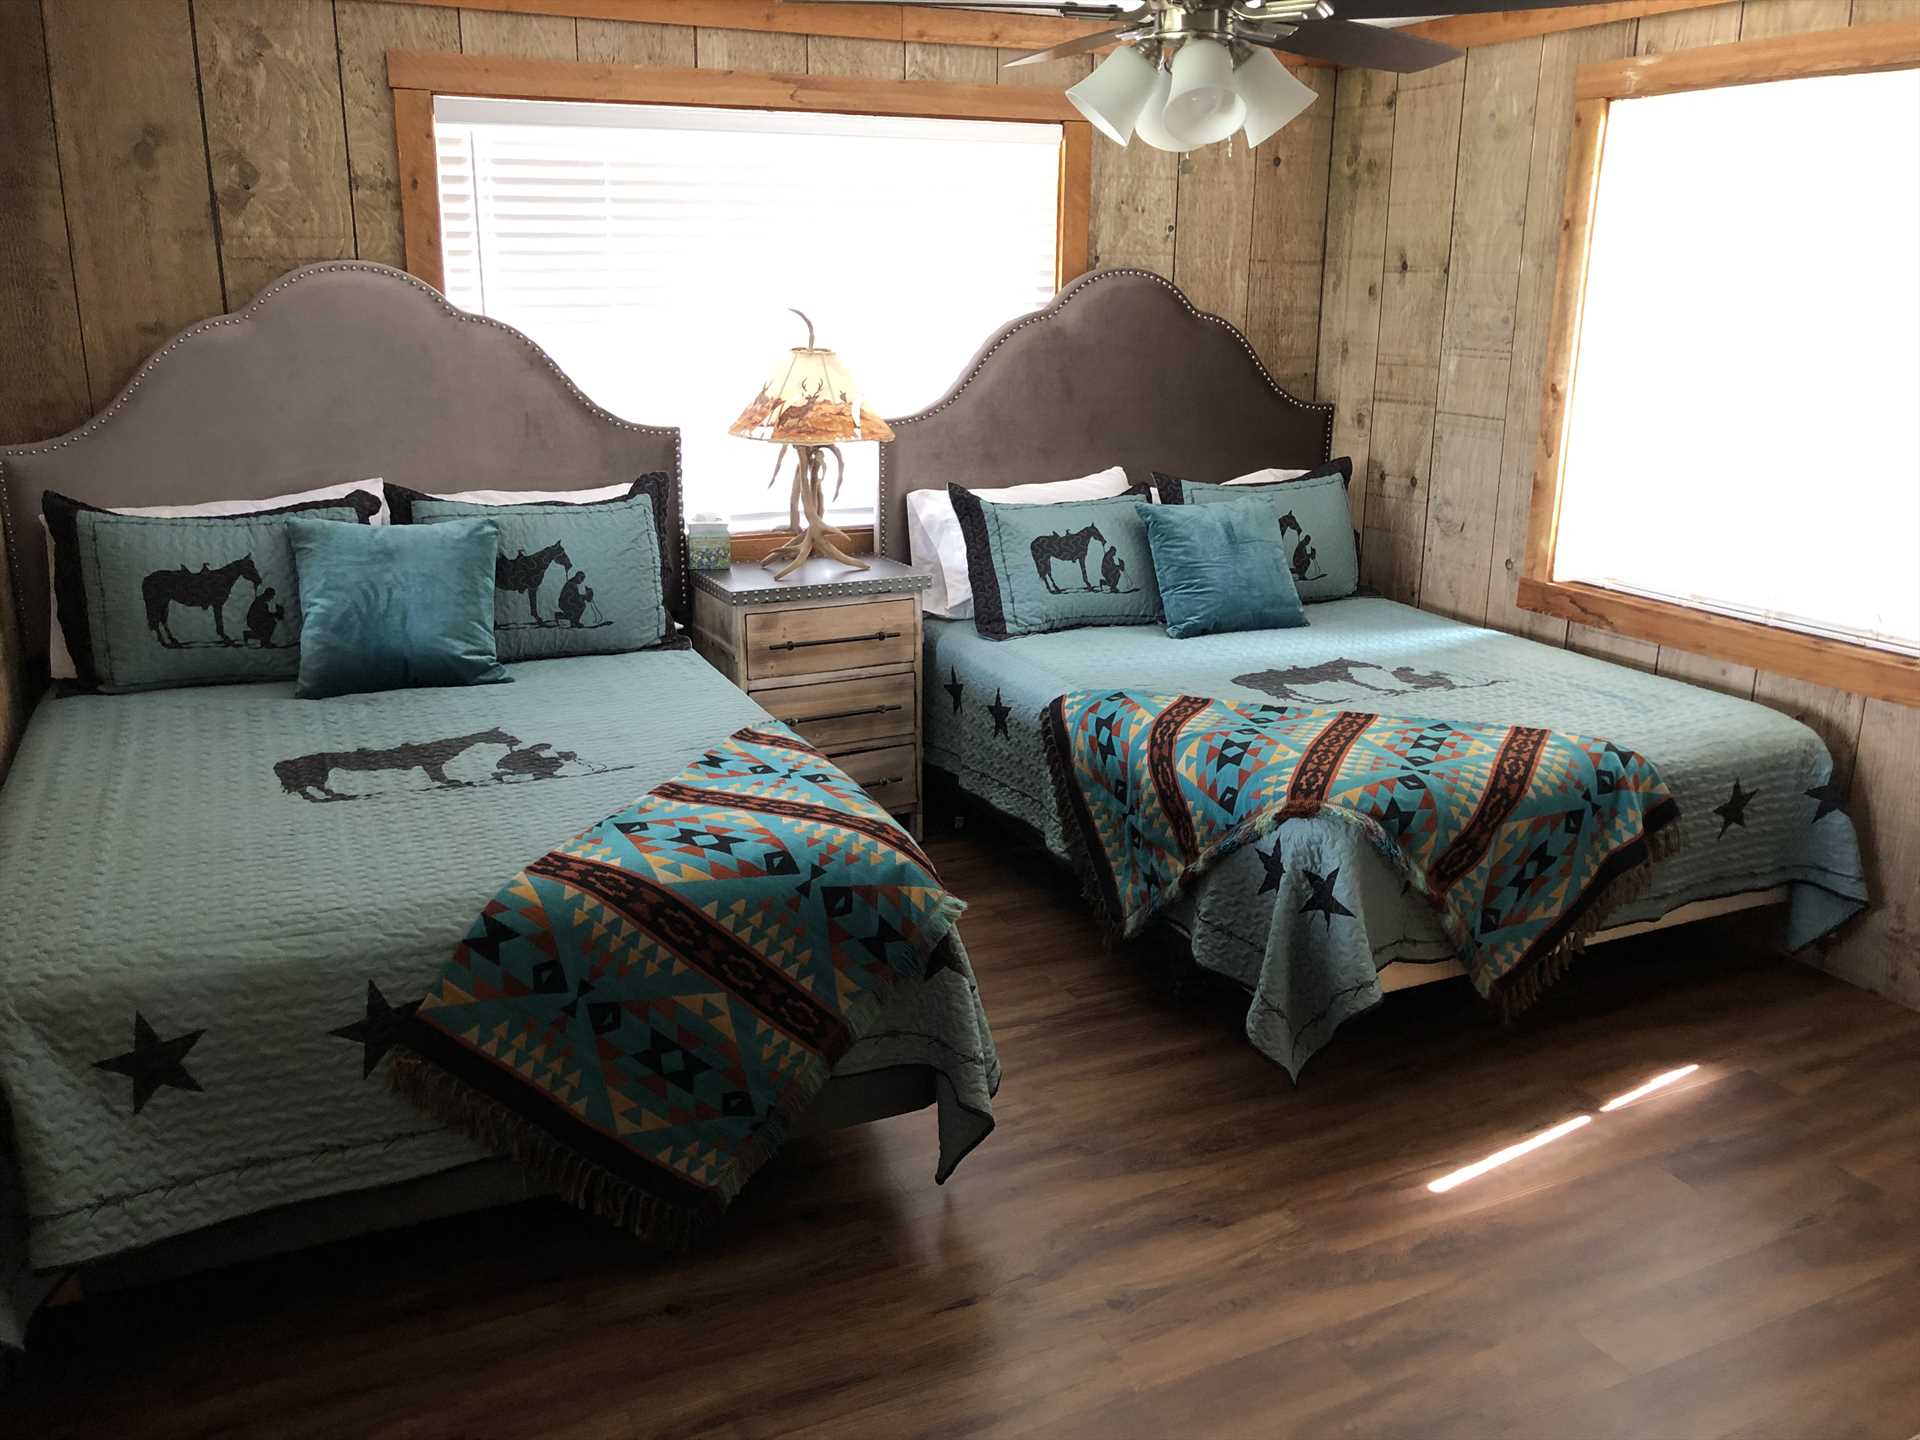                                                 A nicely-matched pair of queen-sized beds grace the second bedroom at the Bluff House, and with a queen sleeper sofa downstairs, the house itself sleeps up to eight people.